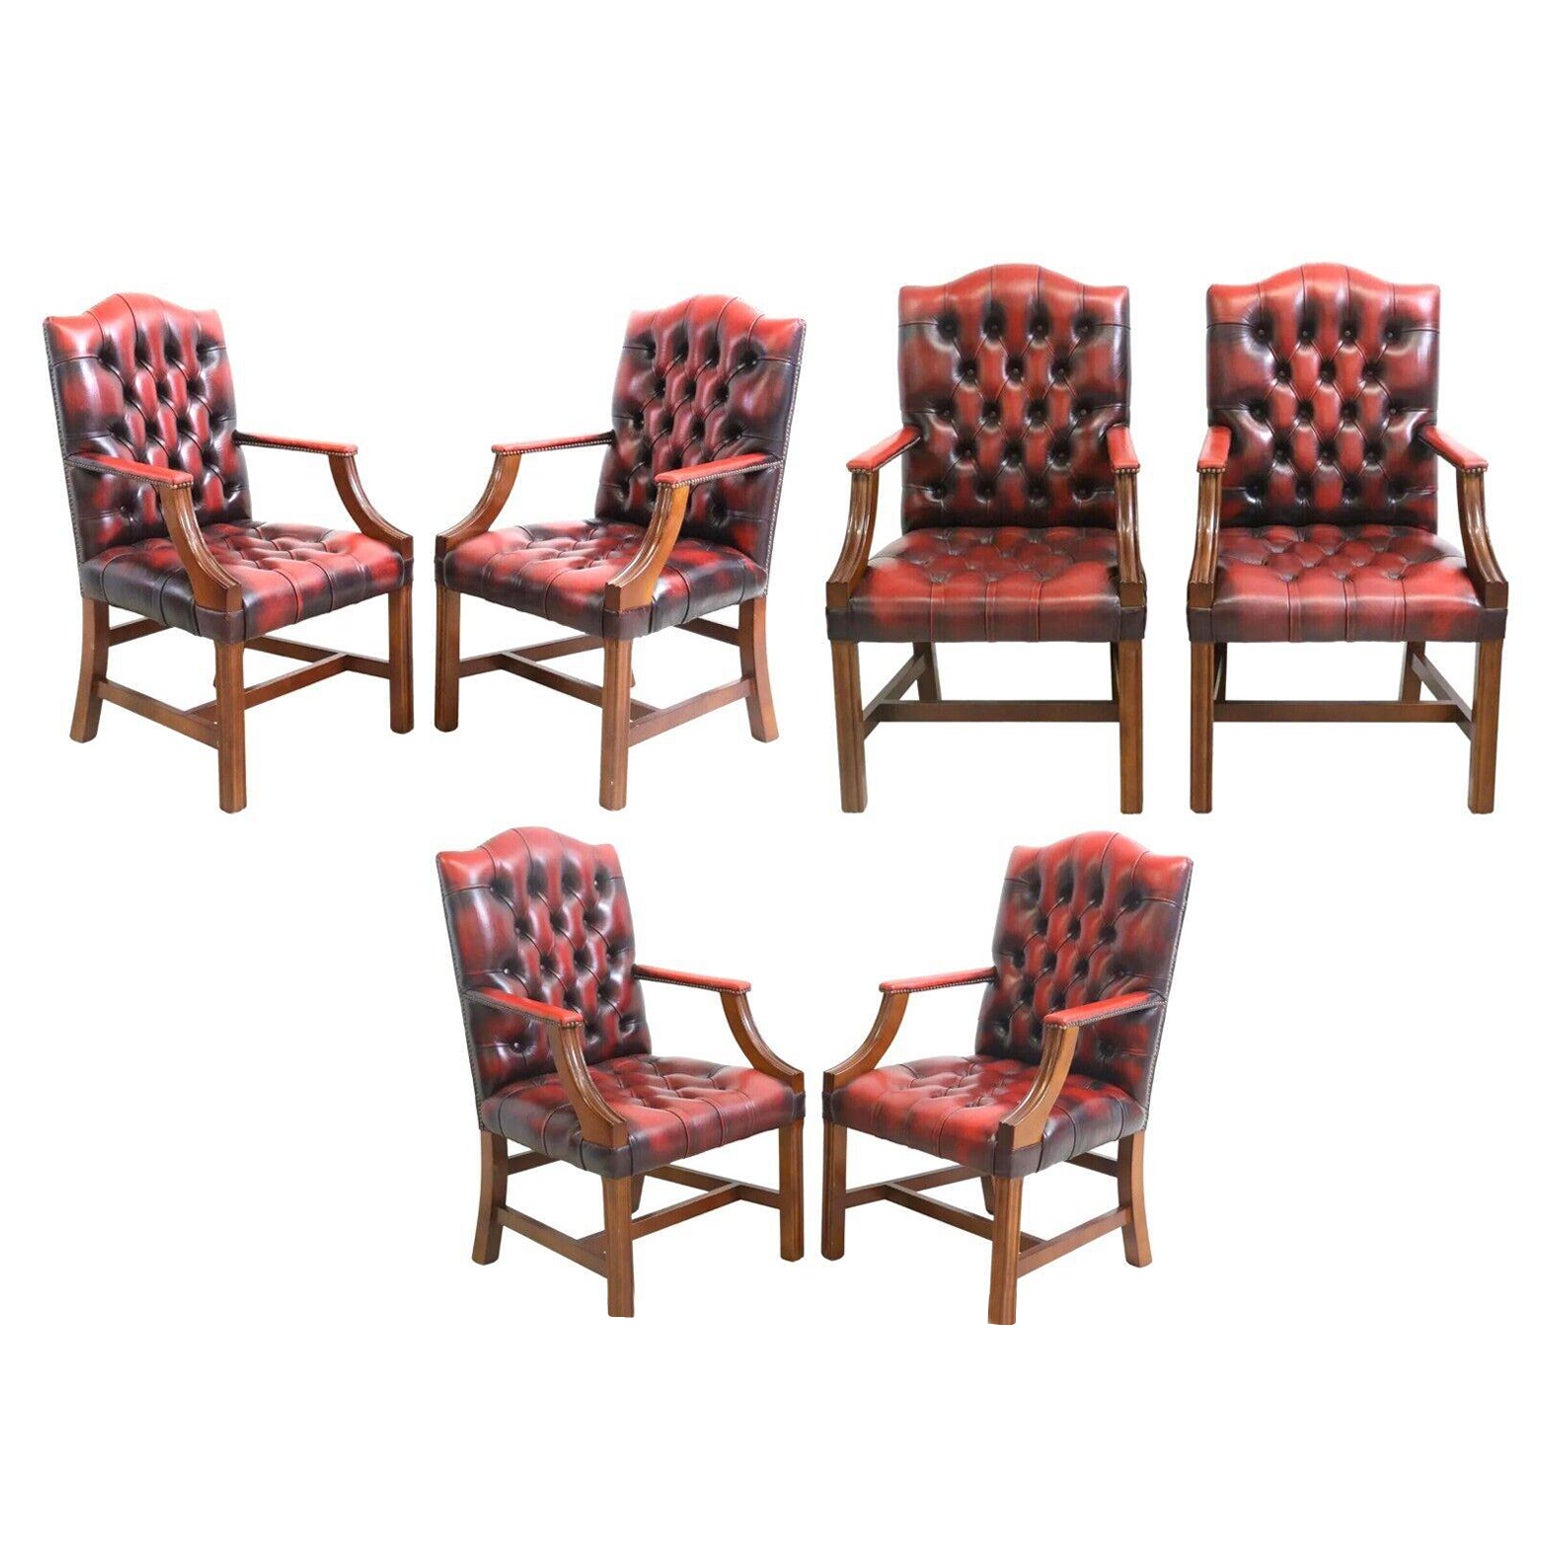 20th C. Red Leather, English, Six, GainsBorough Style, Nailhead Trim Armchairs!